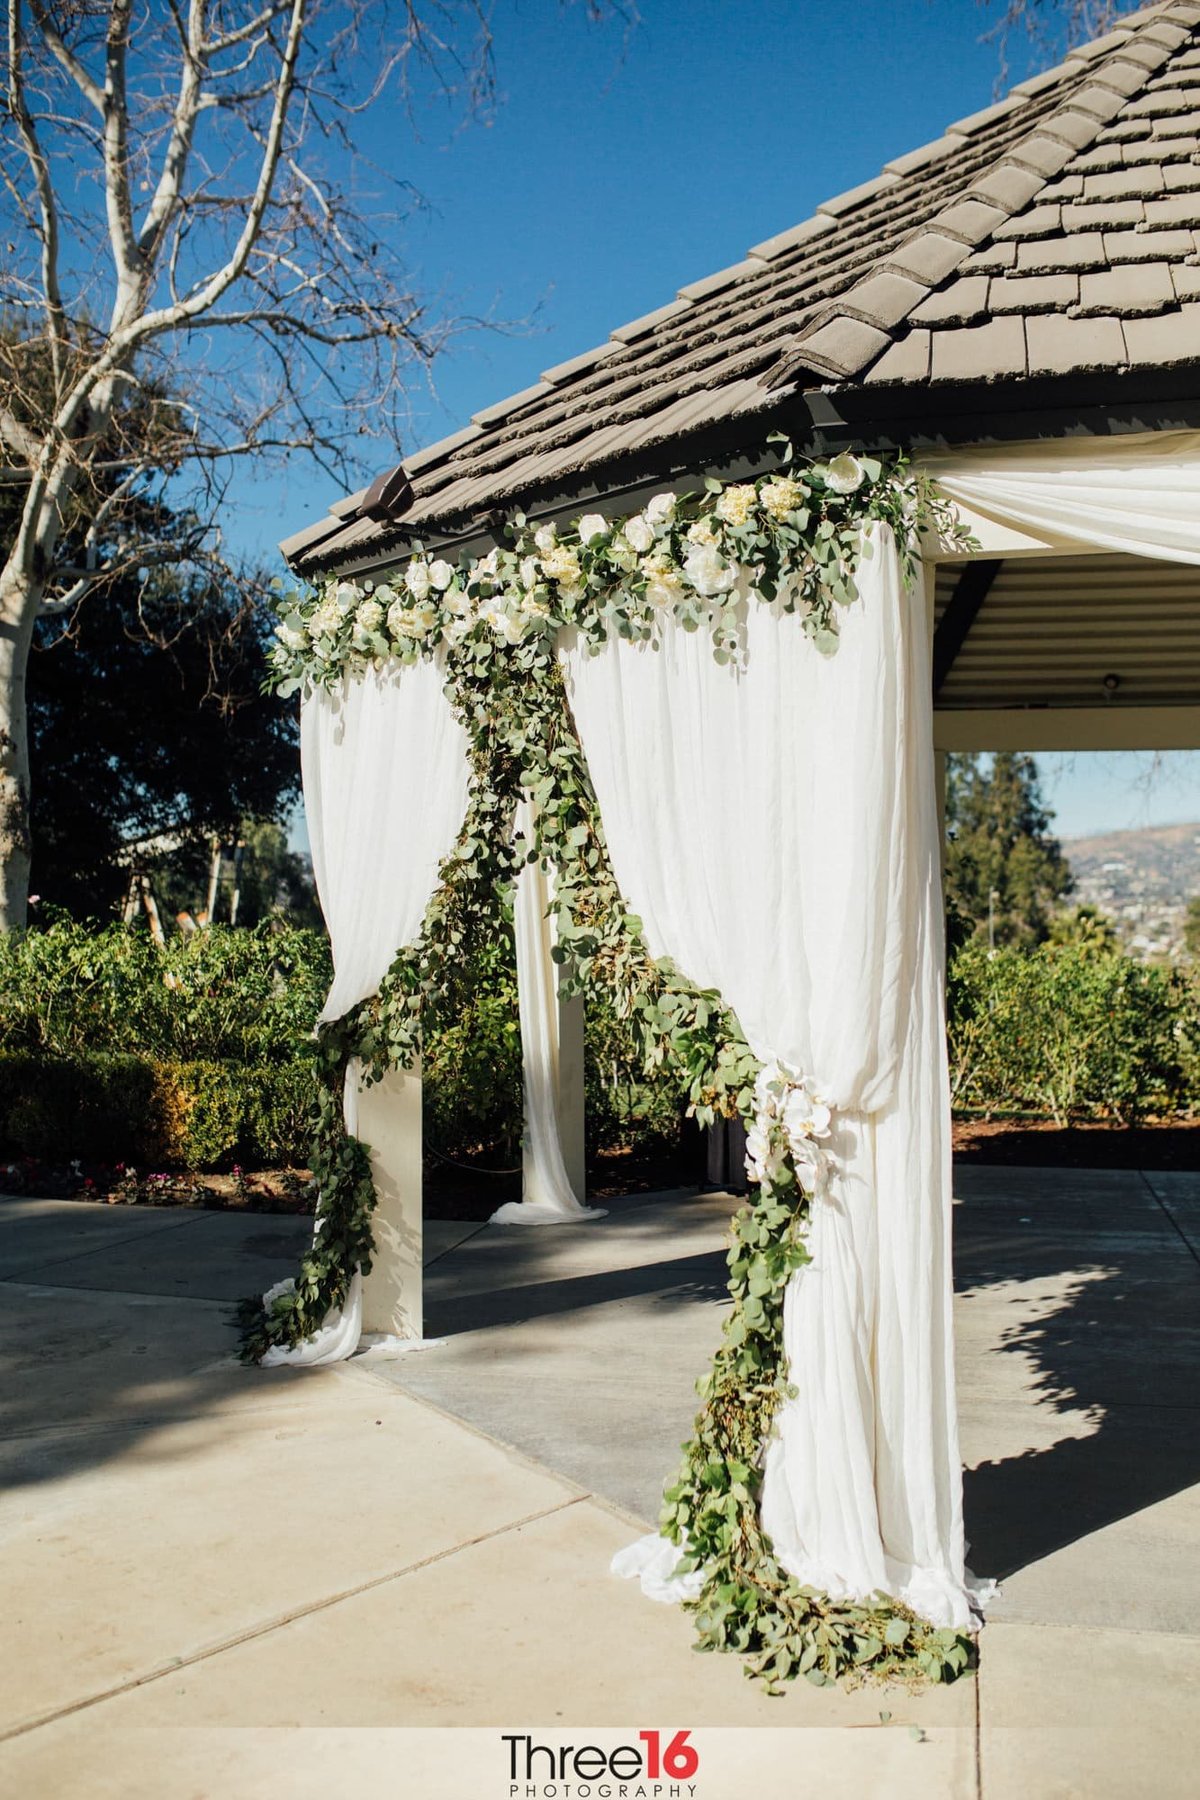 Beautifully floral decoration on the side of the gazebo